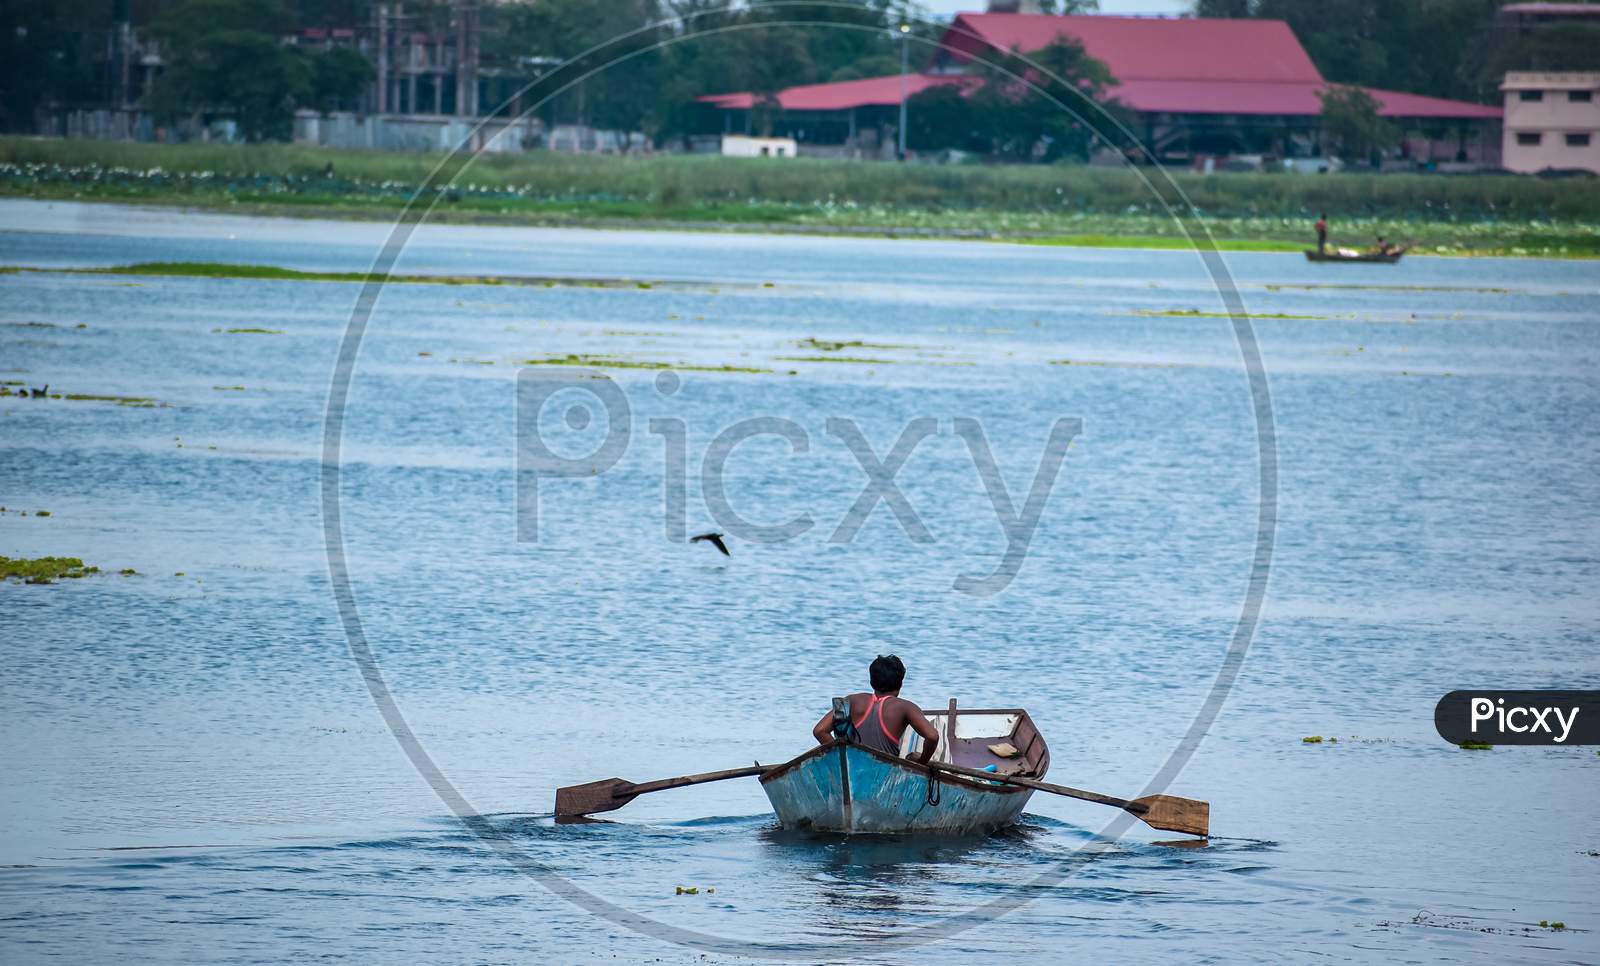 A fisherman driving a boat in the pond filled with water